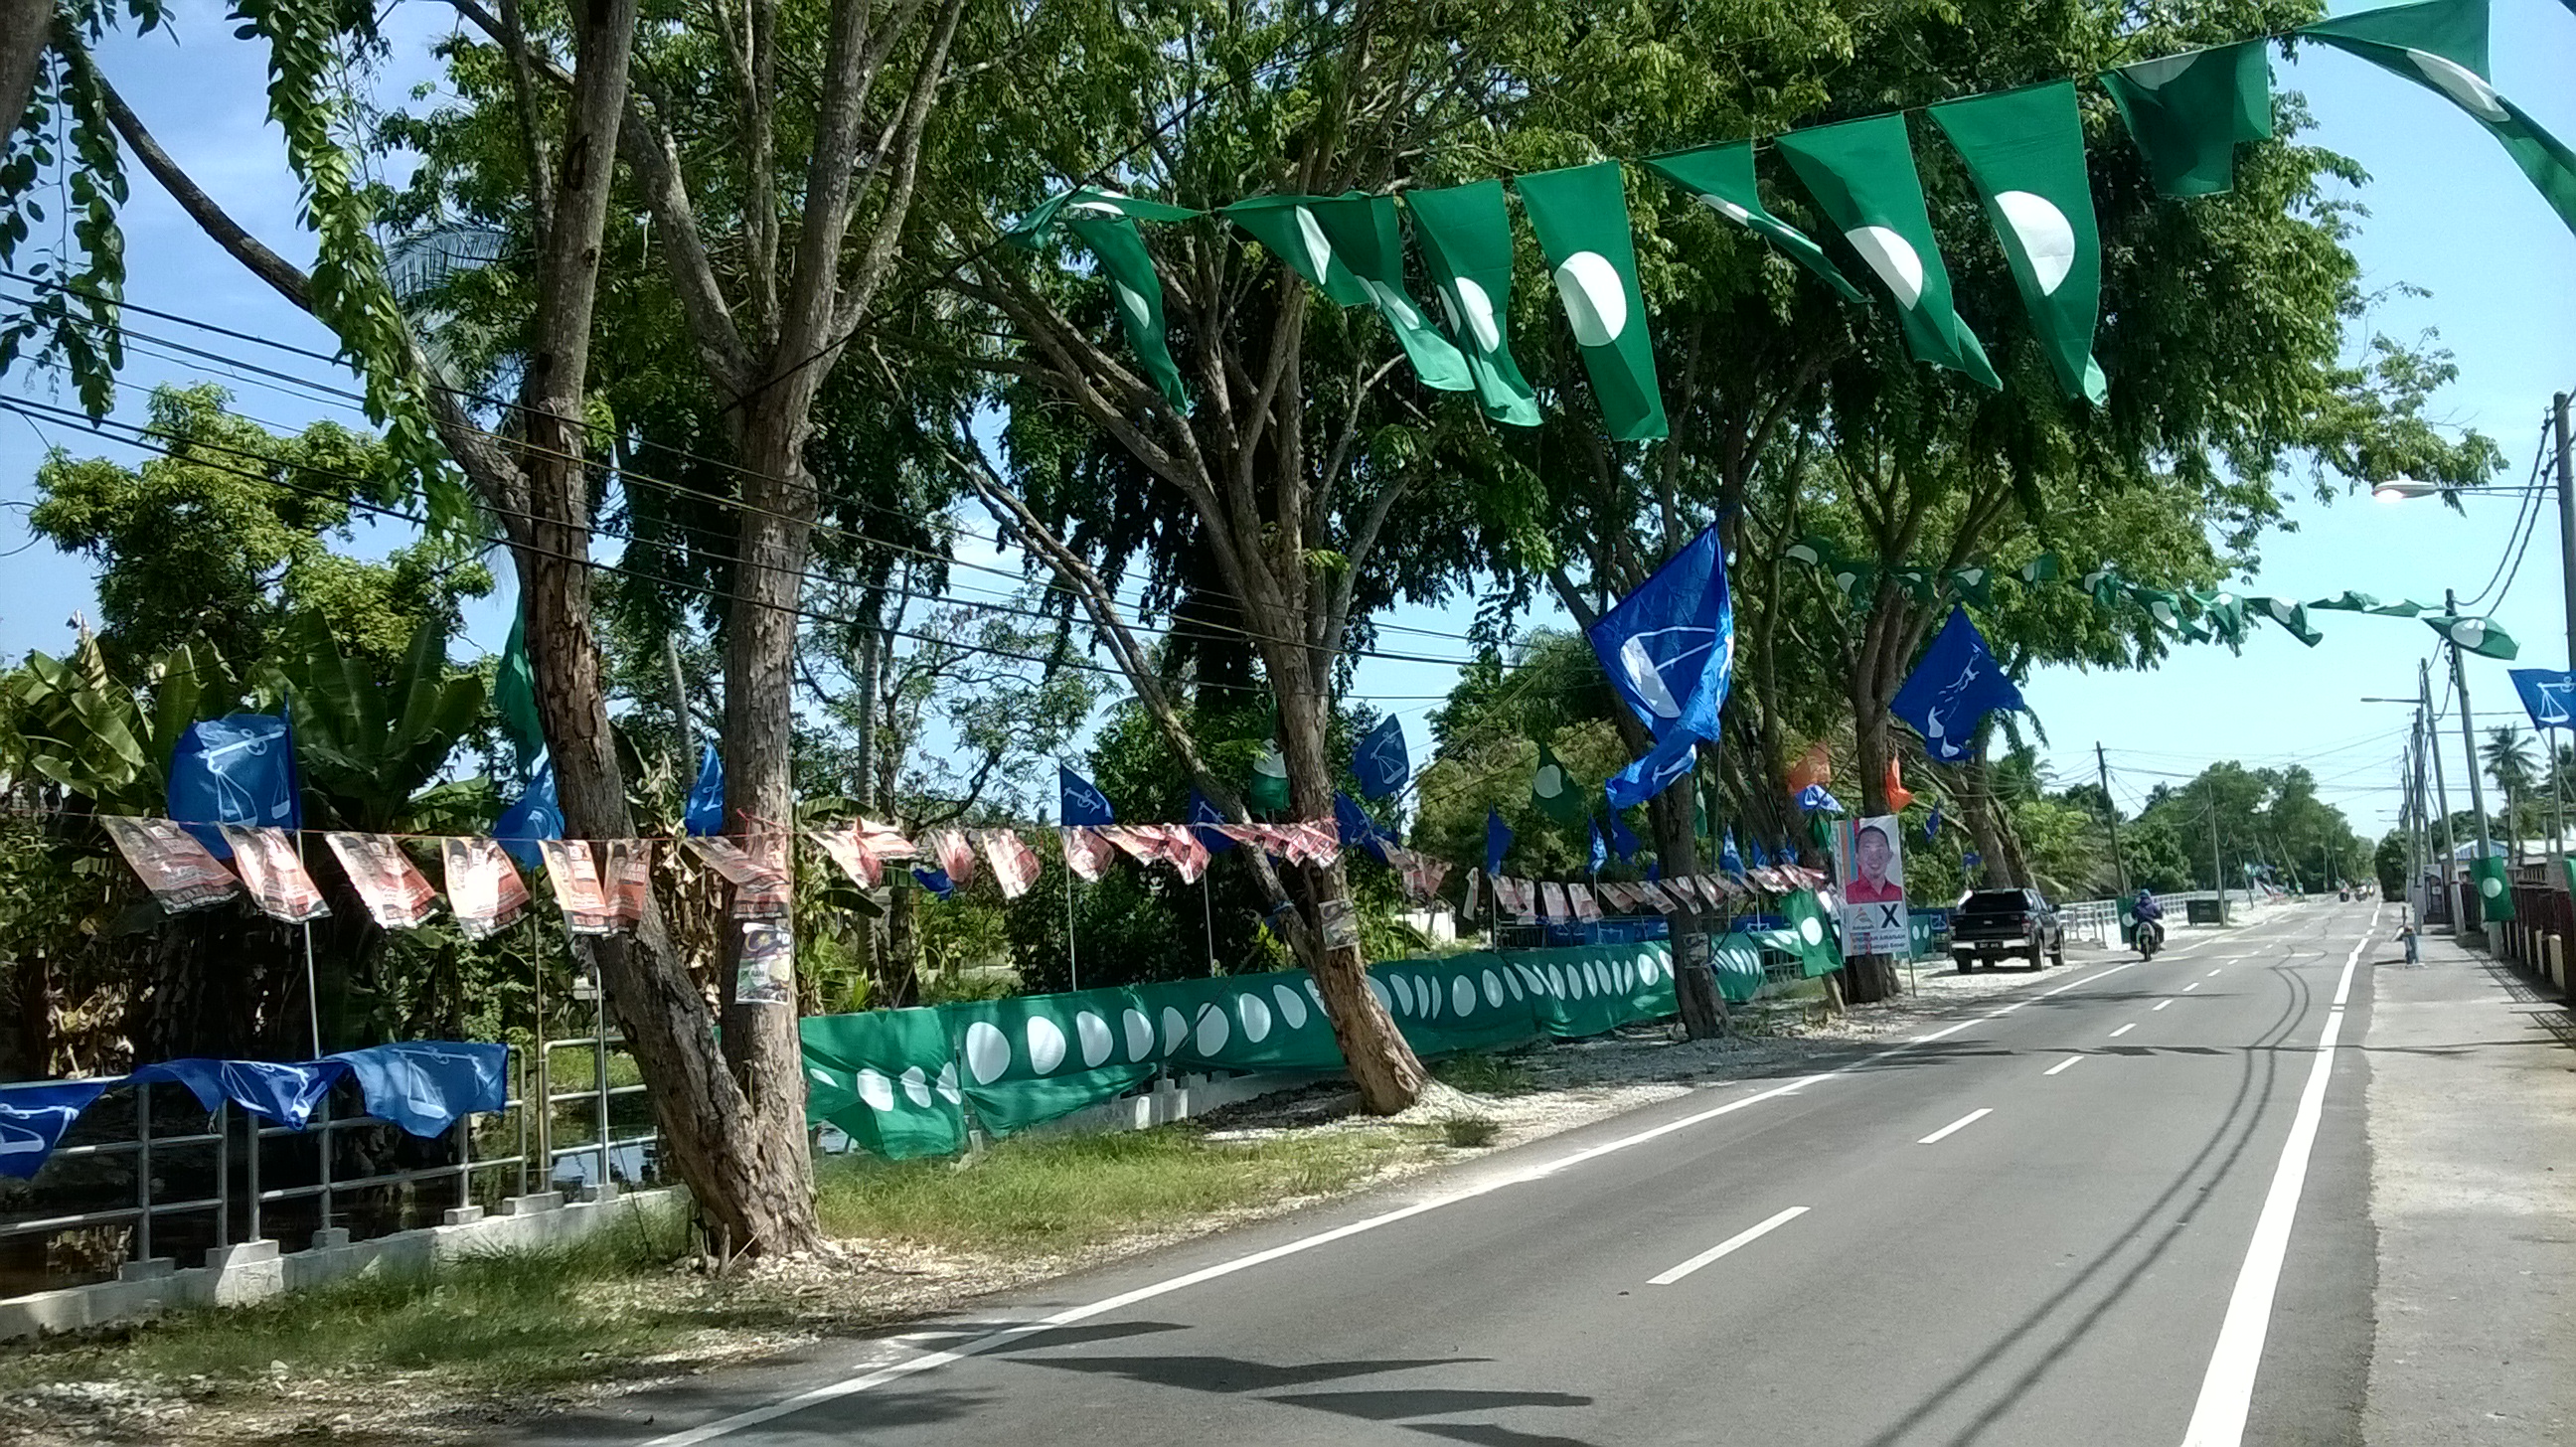 You can see more PAS flags waving around once you reach Sungai Besar town